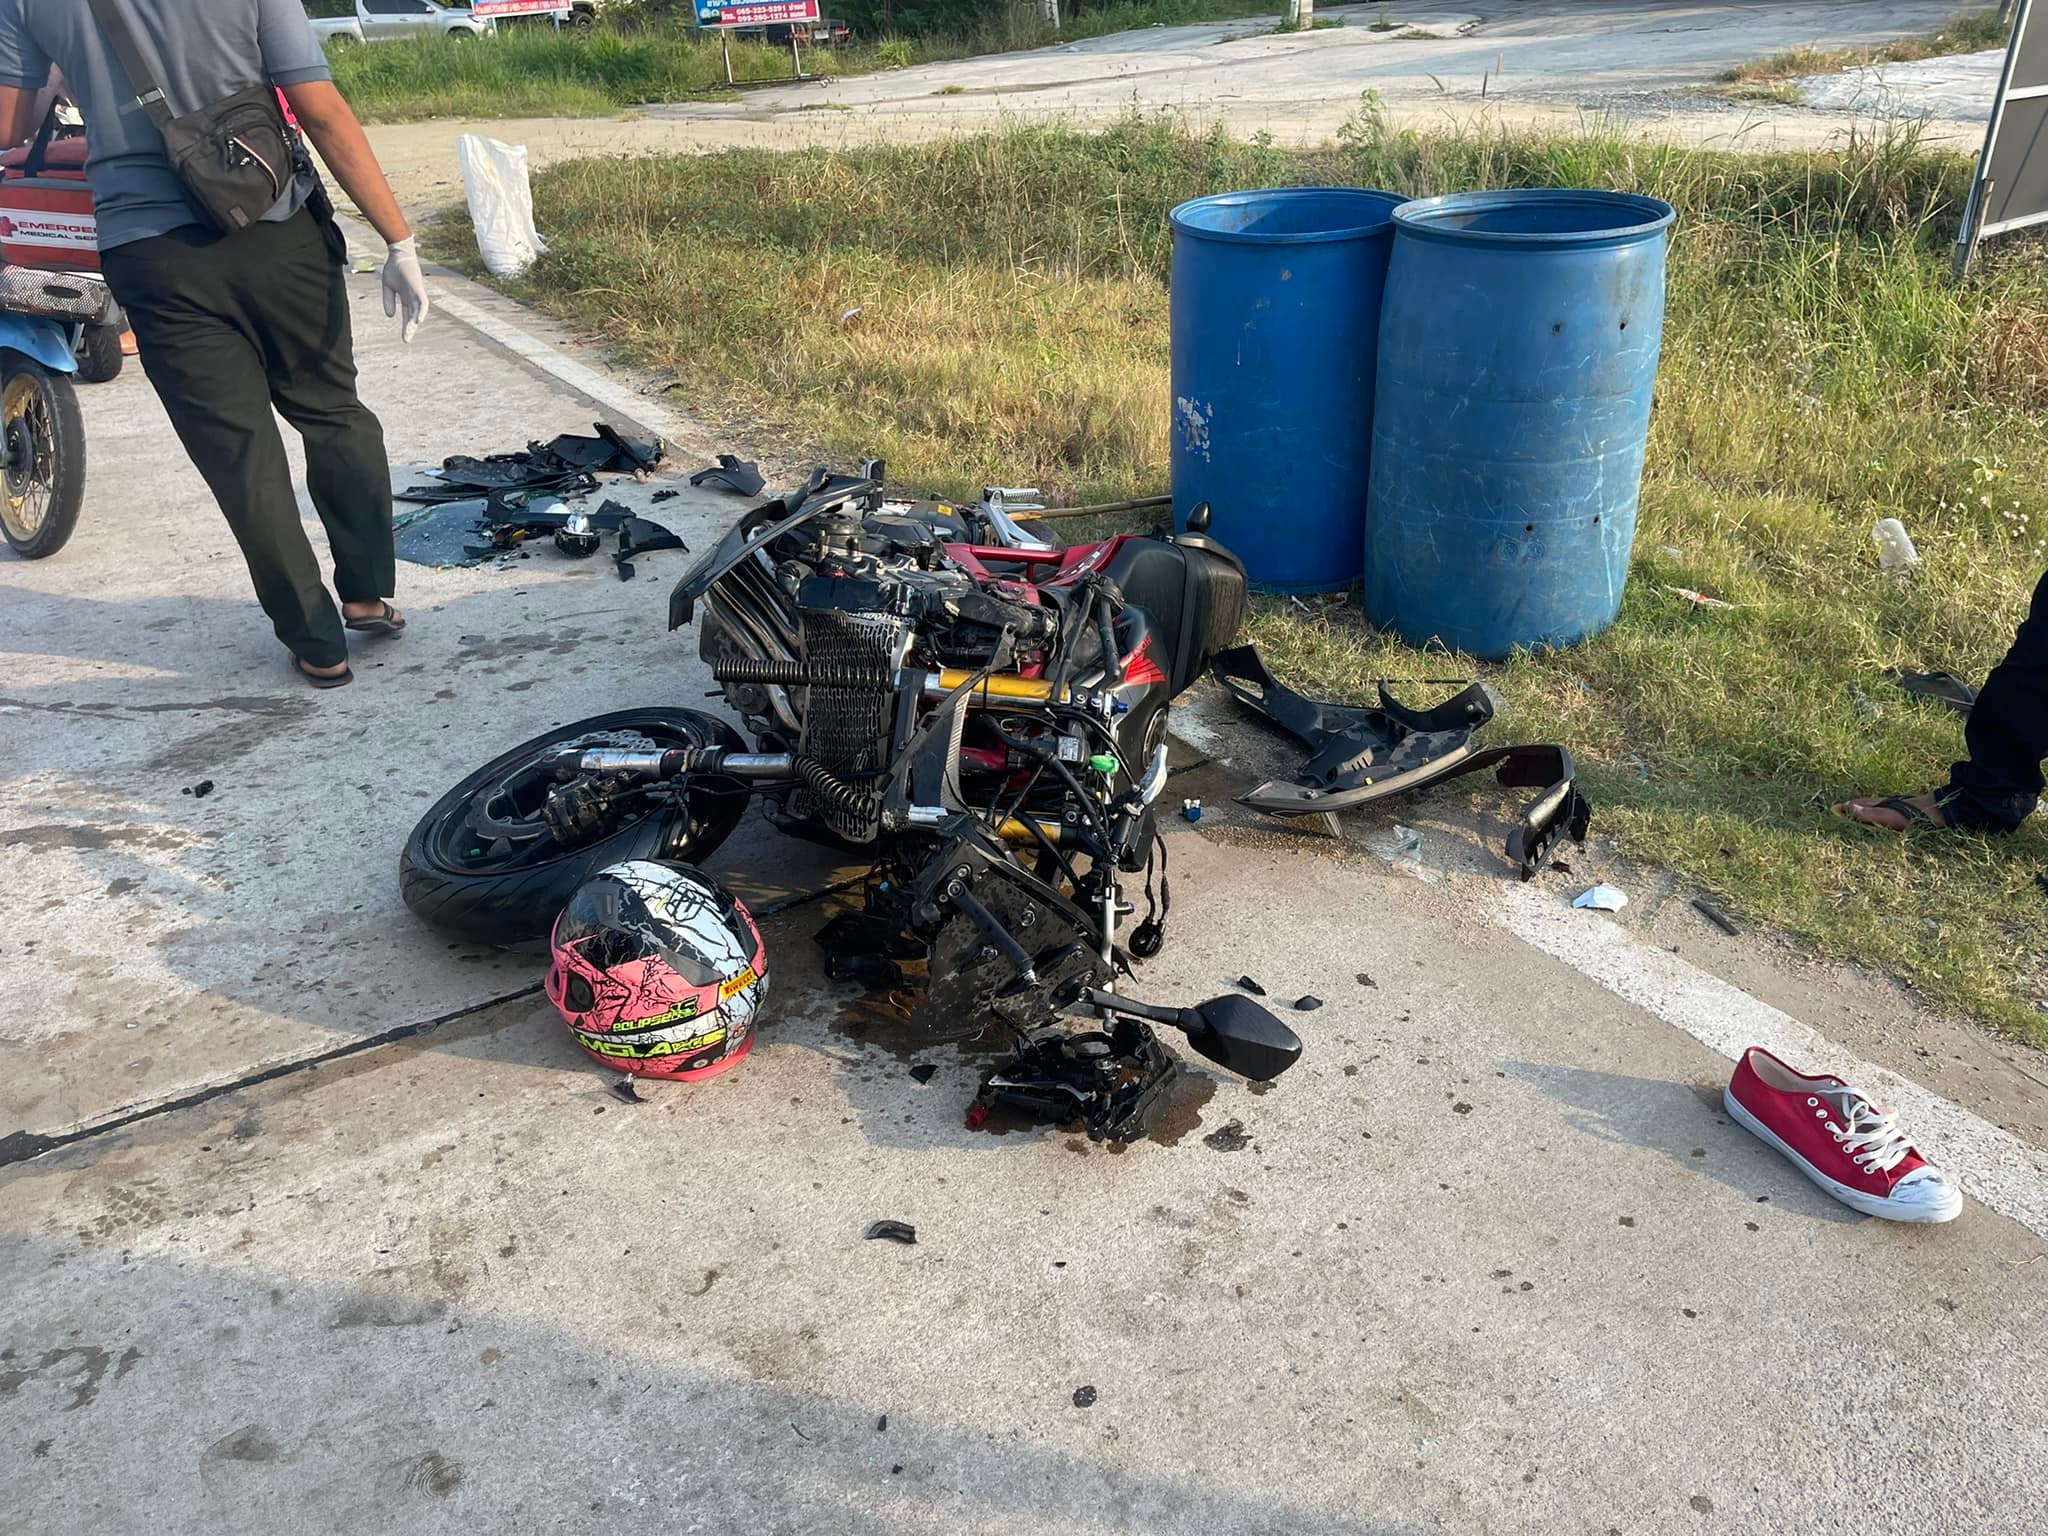 Chonburi announces in total nine deaths with five injuries from the ‘Songkran’s Seven Days of Danger’ road accidents campaign